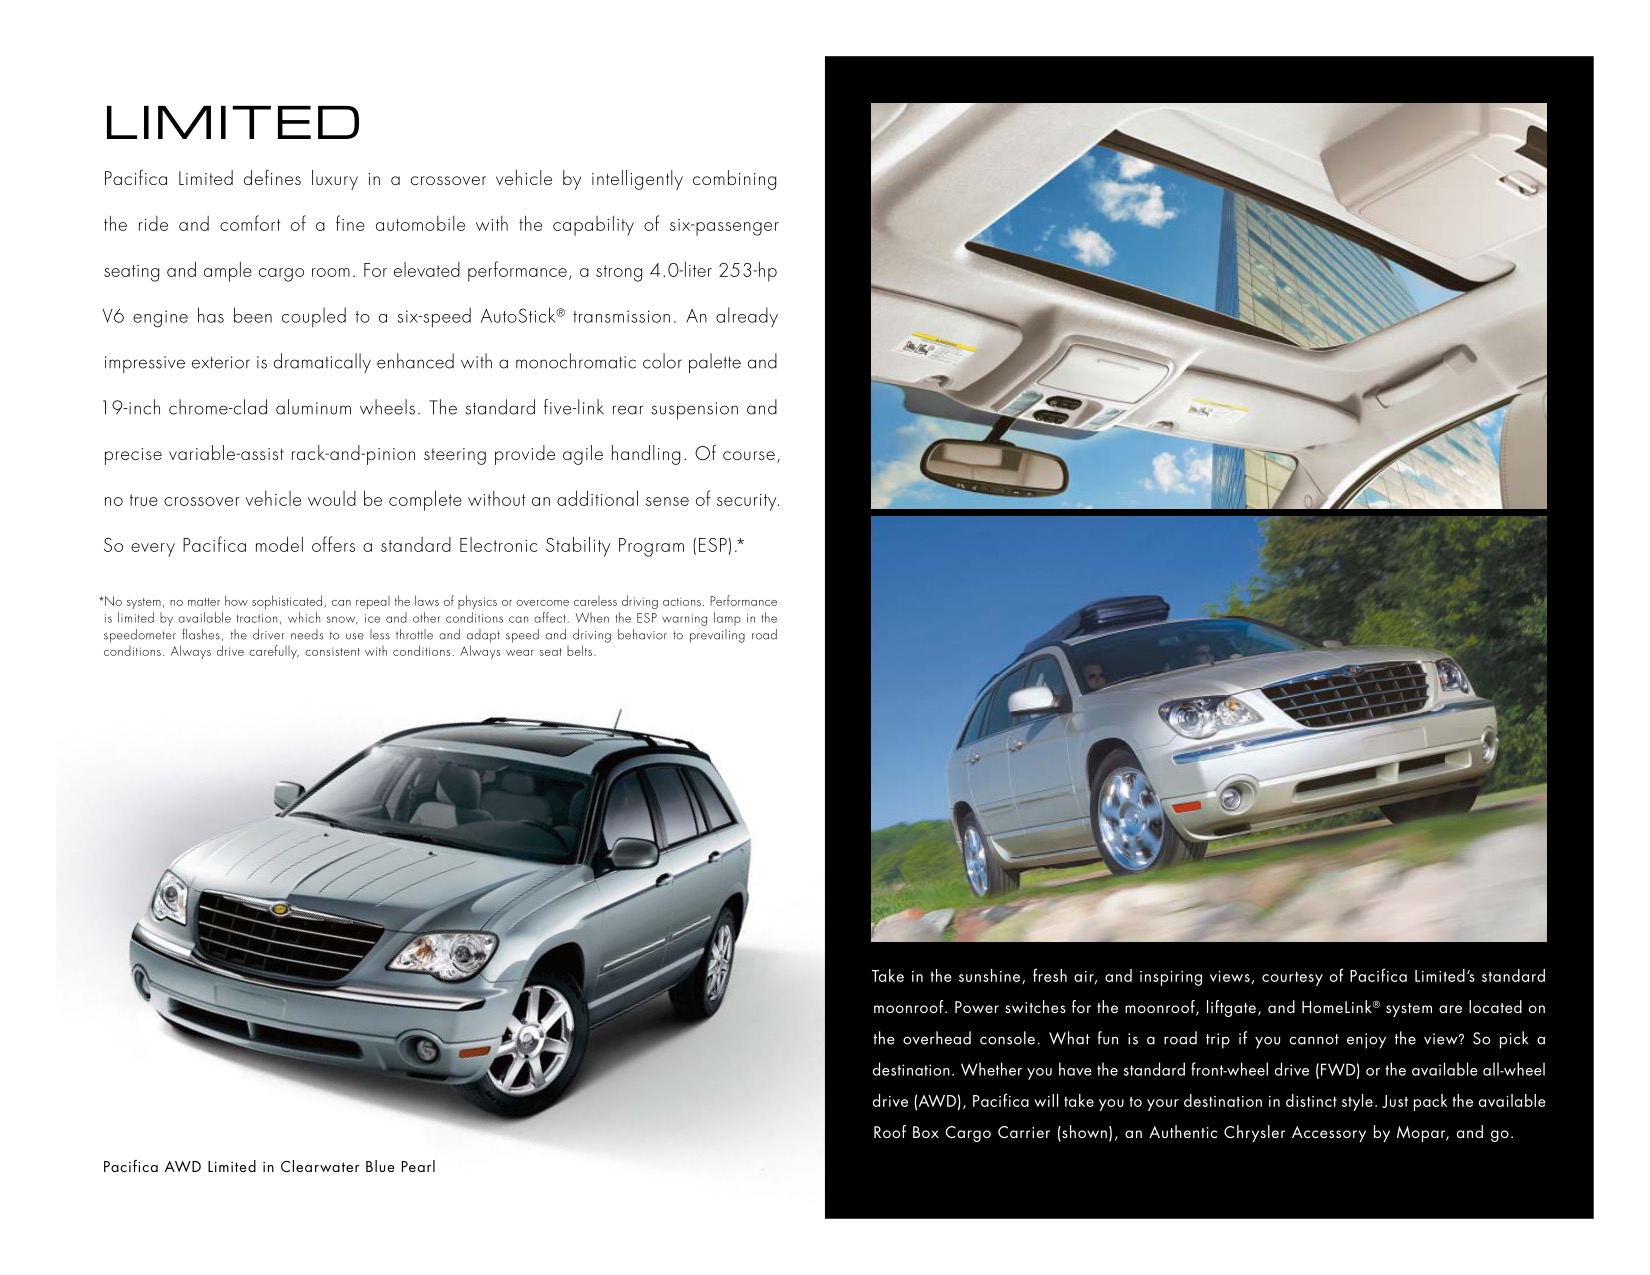 2008 Chrysler Pacifica Brochure Page 11